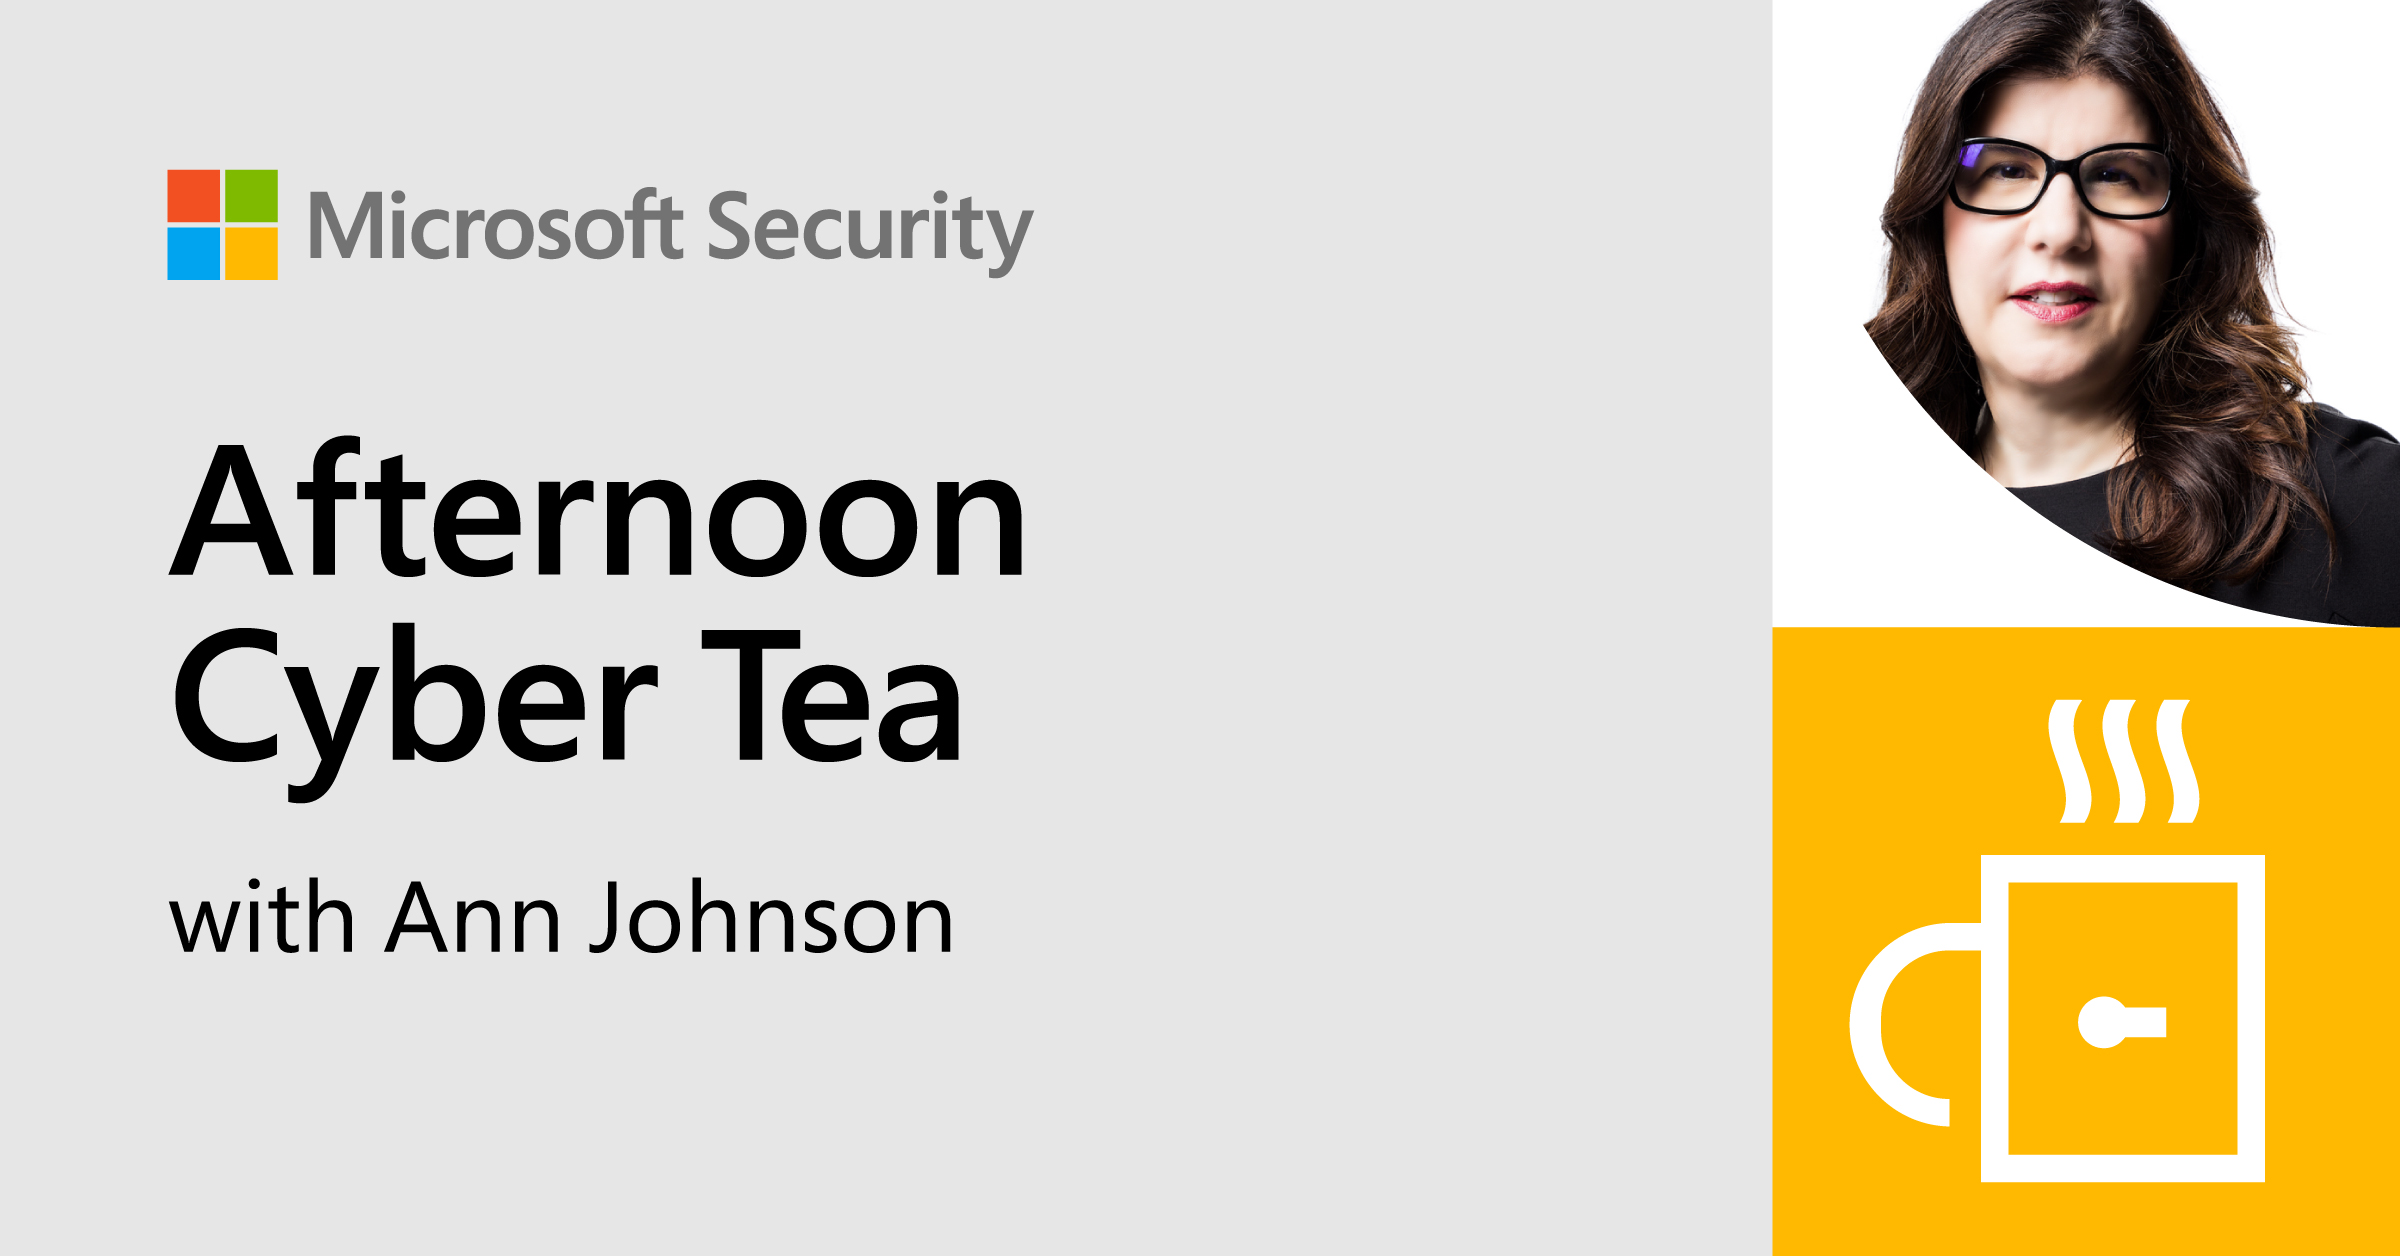 Afternoon Cyber Tea with Ann Johnson 1.11.22